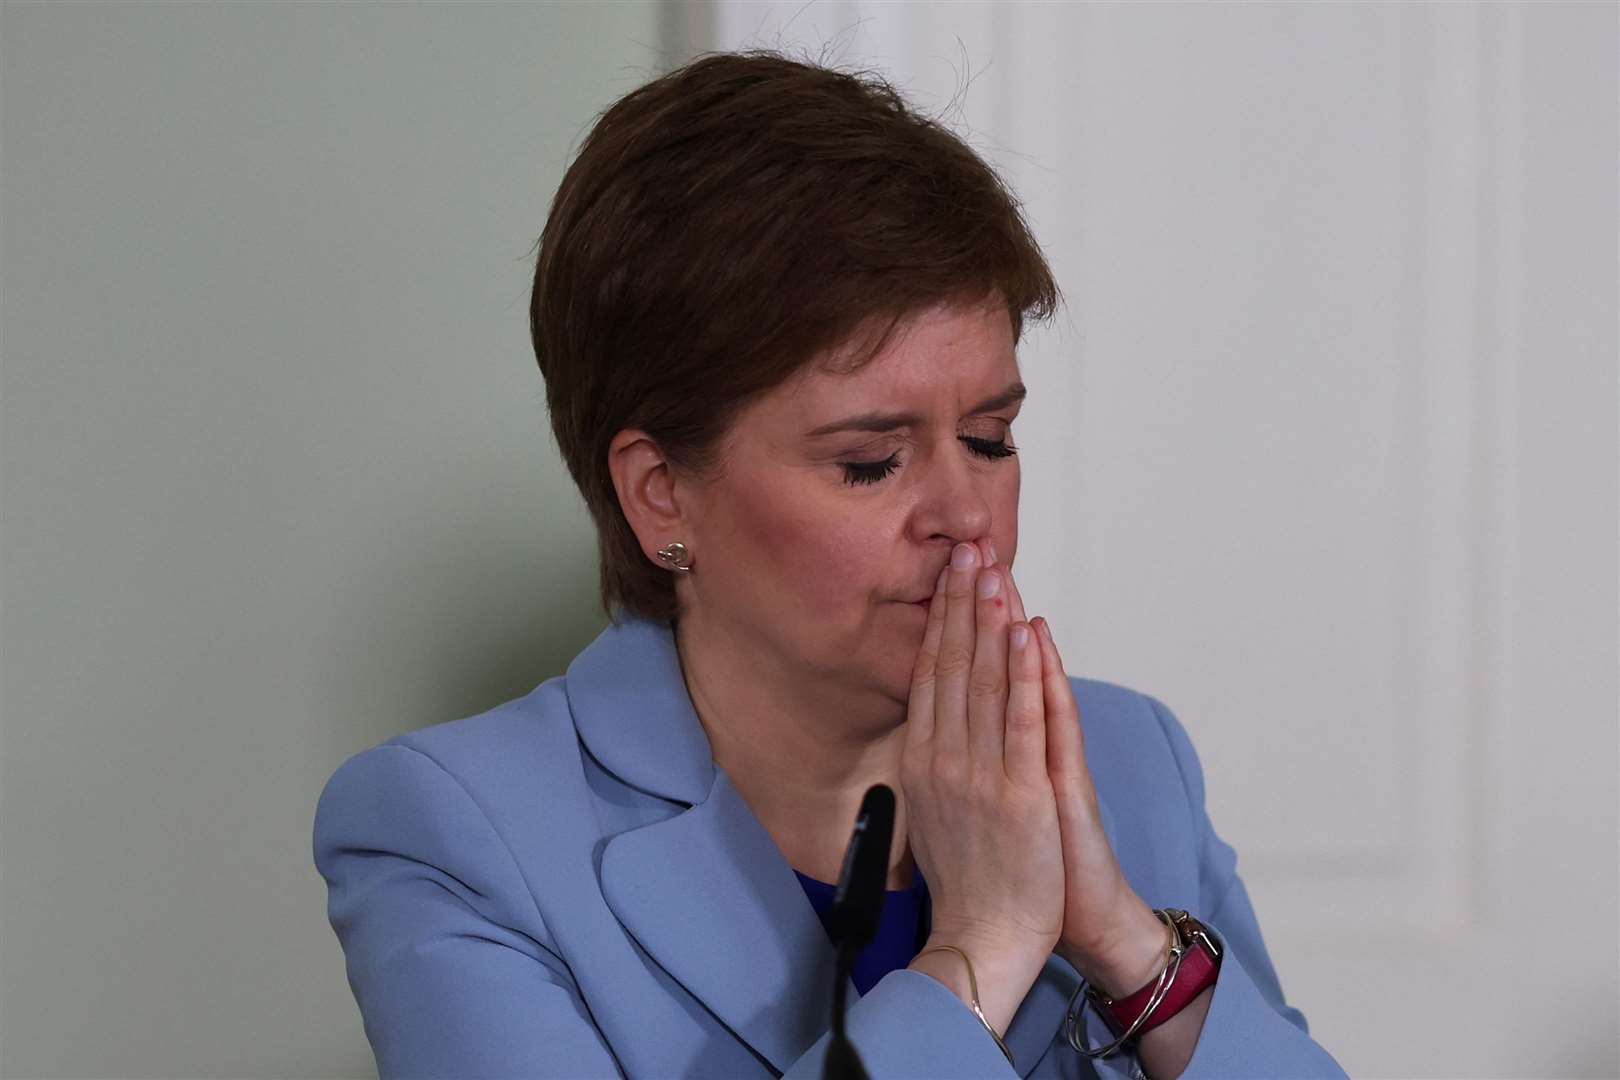 Nicola Sturgeon promised on update on how she will progress plans to hold a referendum ‘very soon’ (Russell Cheyne/PA)